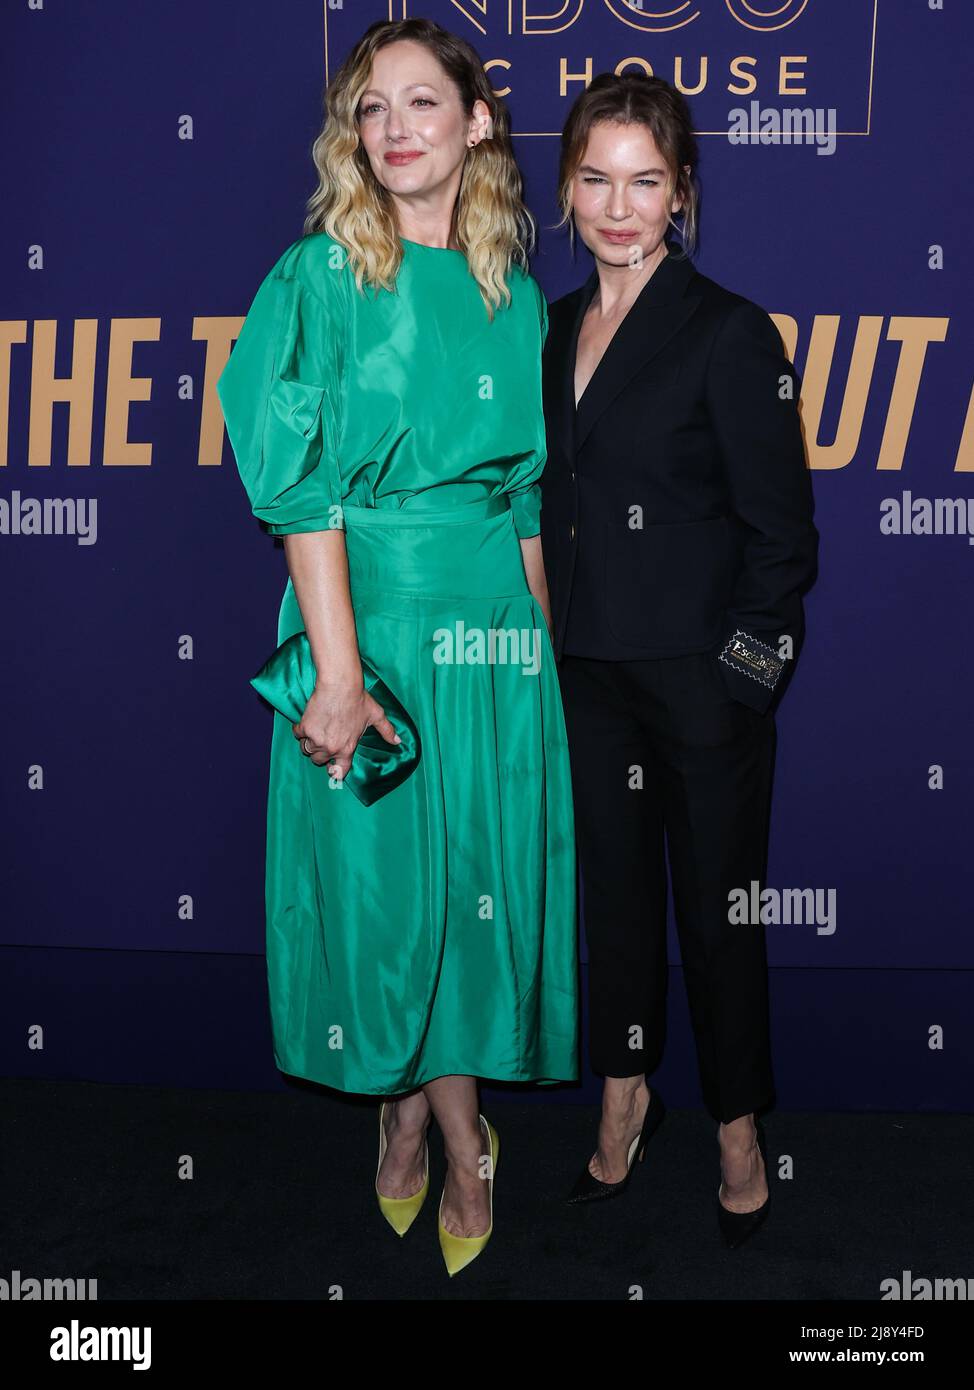 HOLLYWOOD, LOS ANGELES, CALIFORNIA, USA - MAY 18: American actresses Judy Greer and Renée Zellweger (Renee Zellweger) arrive at NBCUniversal's FYC Event For 'The Thing About Pam' held at the NBCU FYC House on May 18, 2022 in Hollywood, Los Angeles, California, United States. (Photo by Xavier Collin/Image Press Agency) Stock Photo